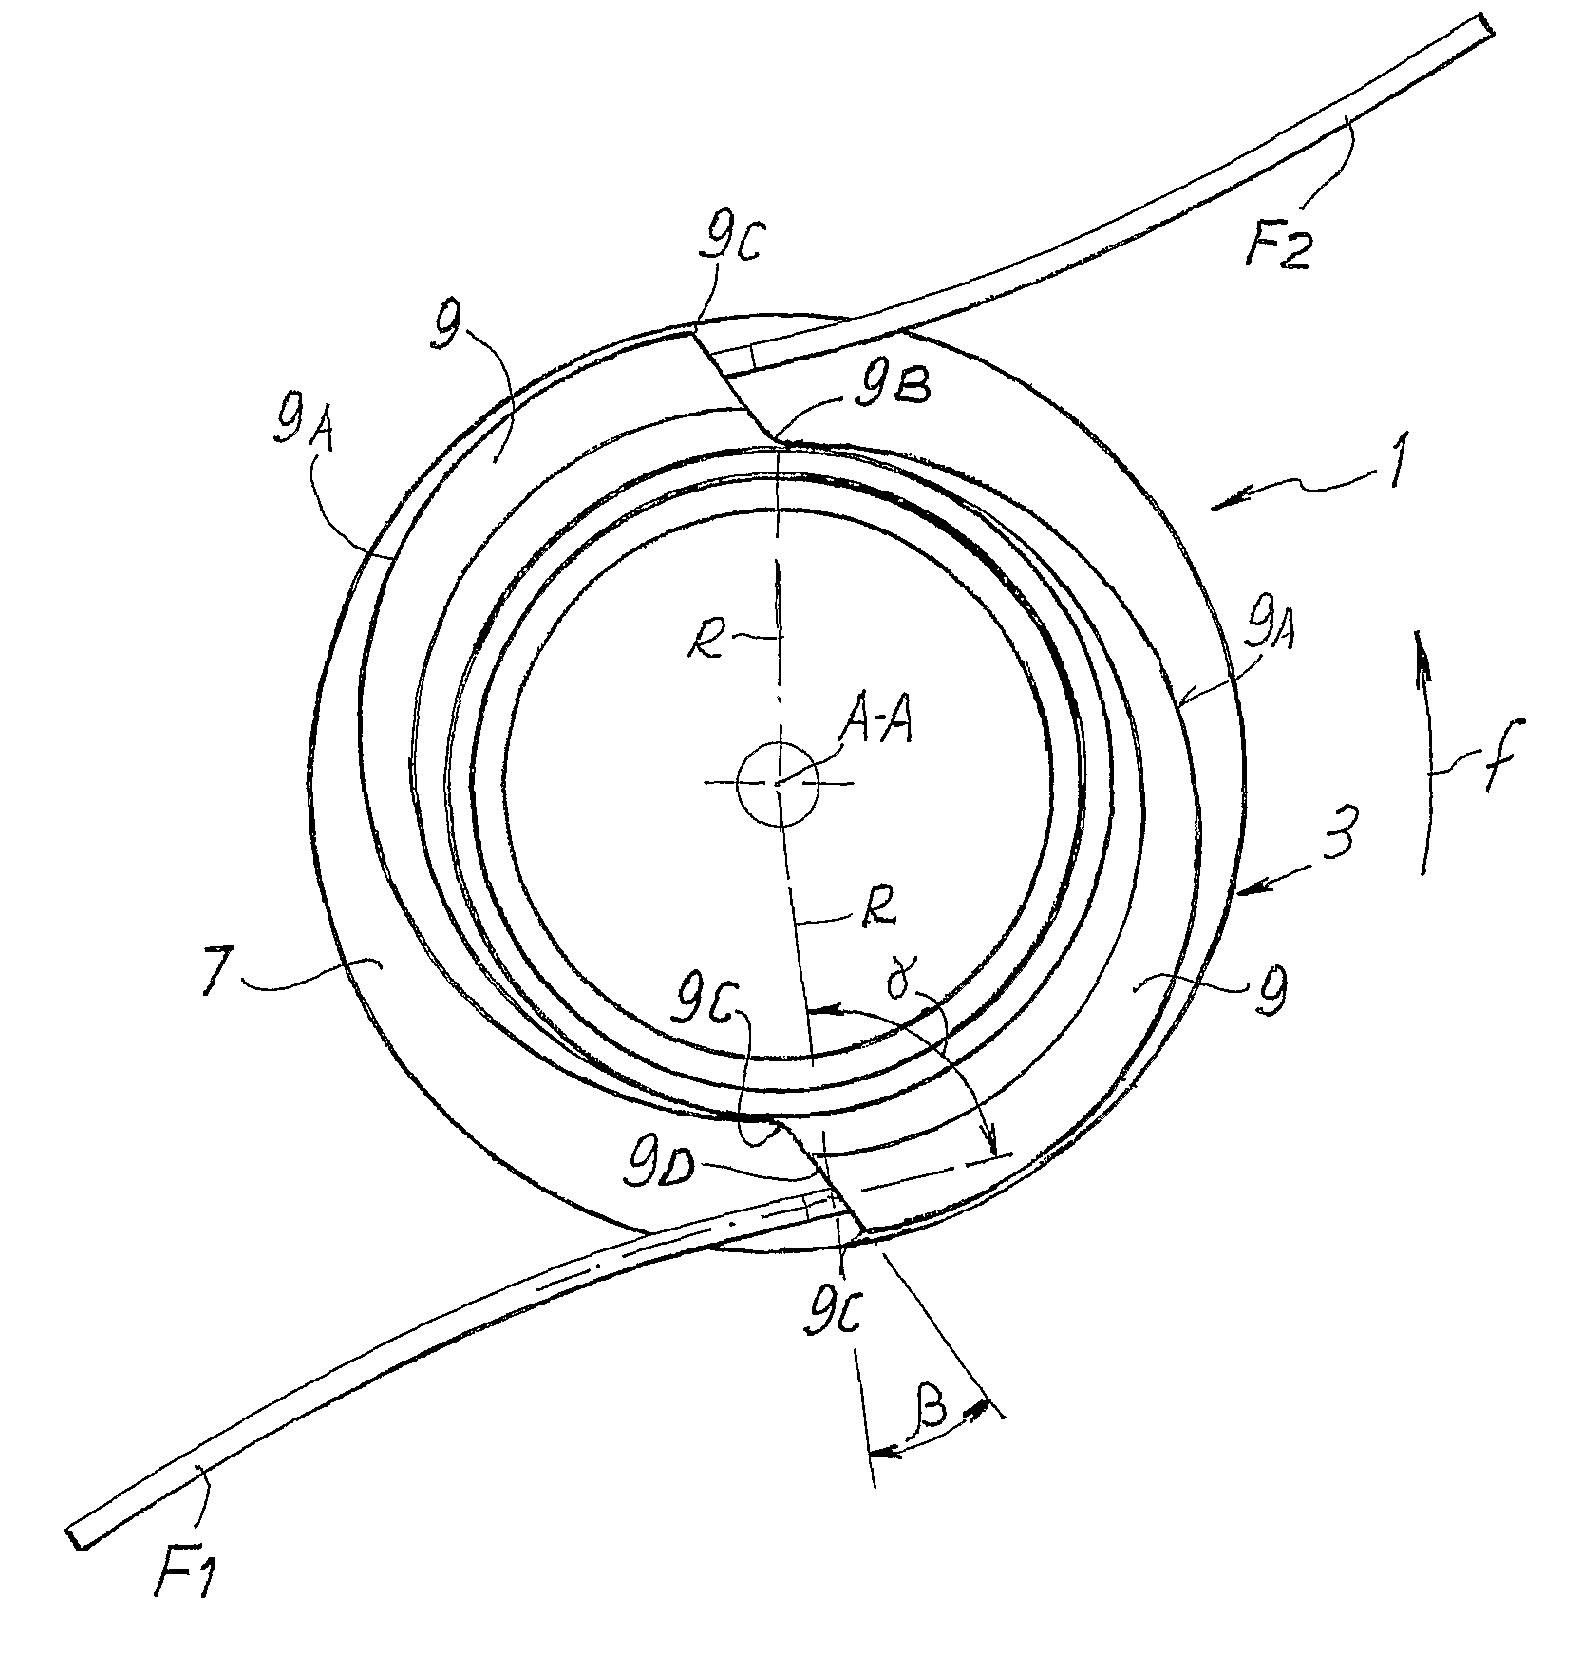 Grass-cutting head with spiral guide channels for the cutting line